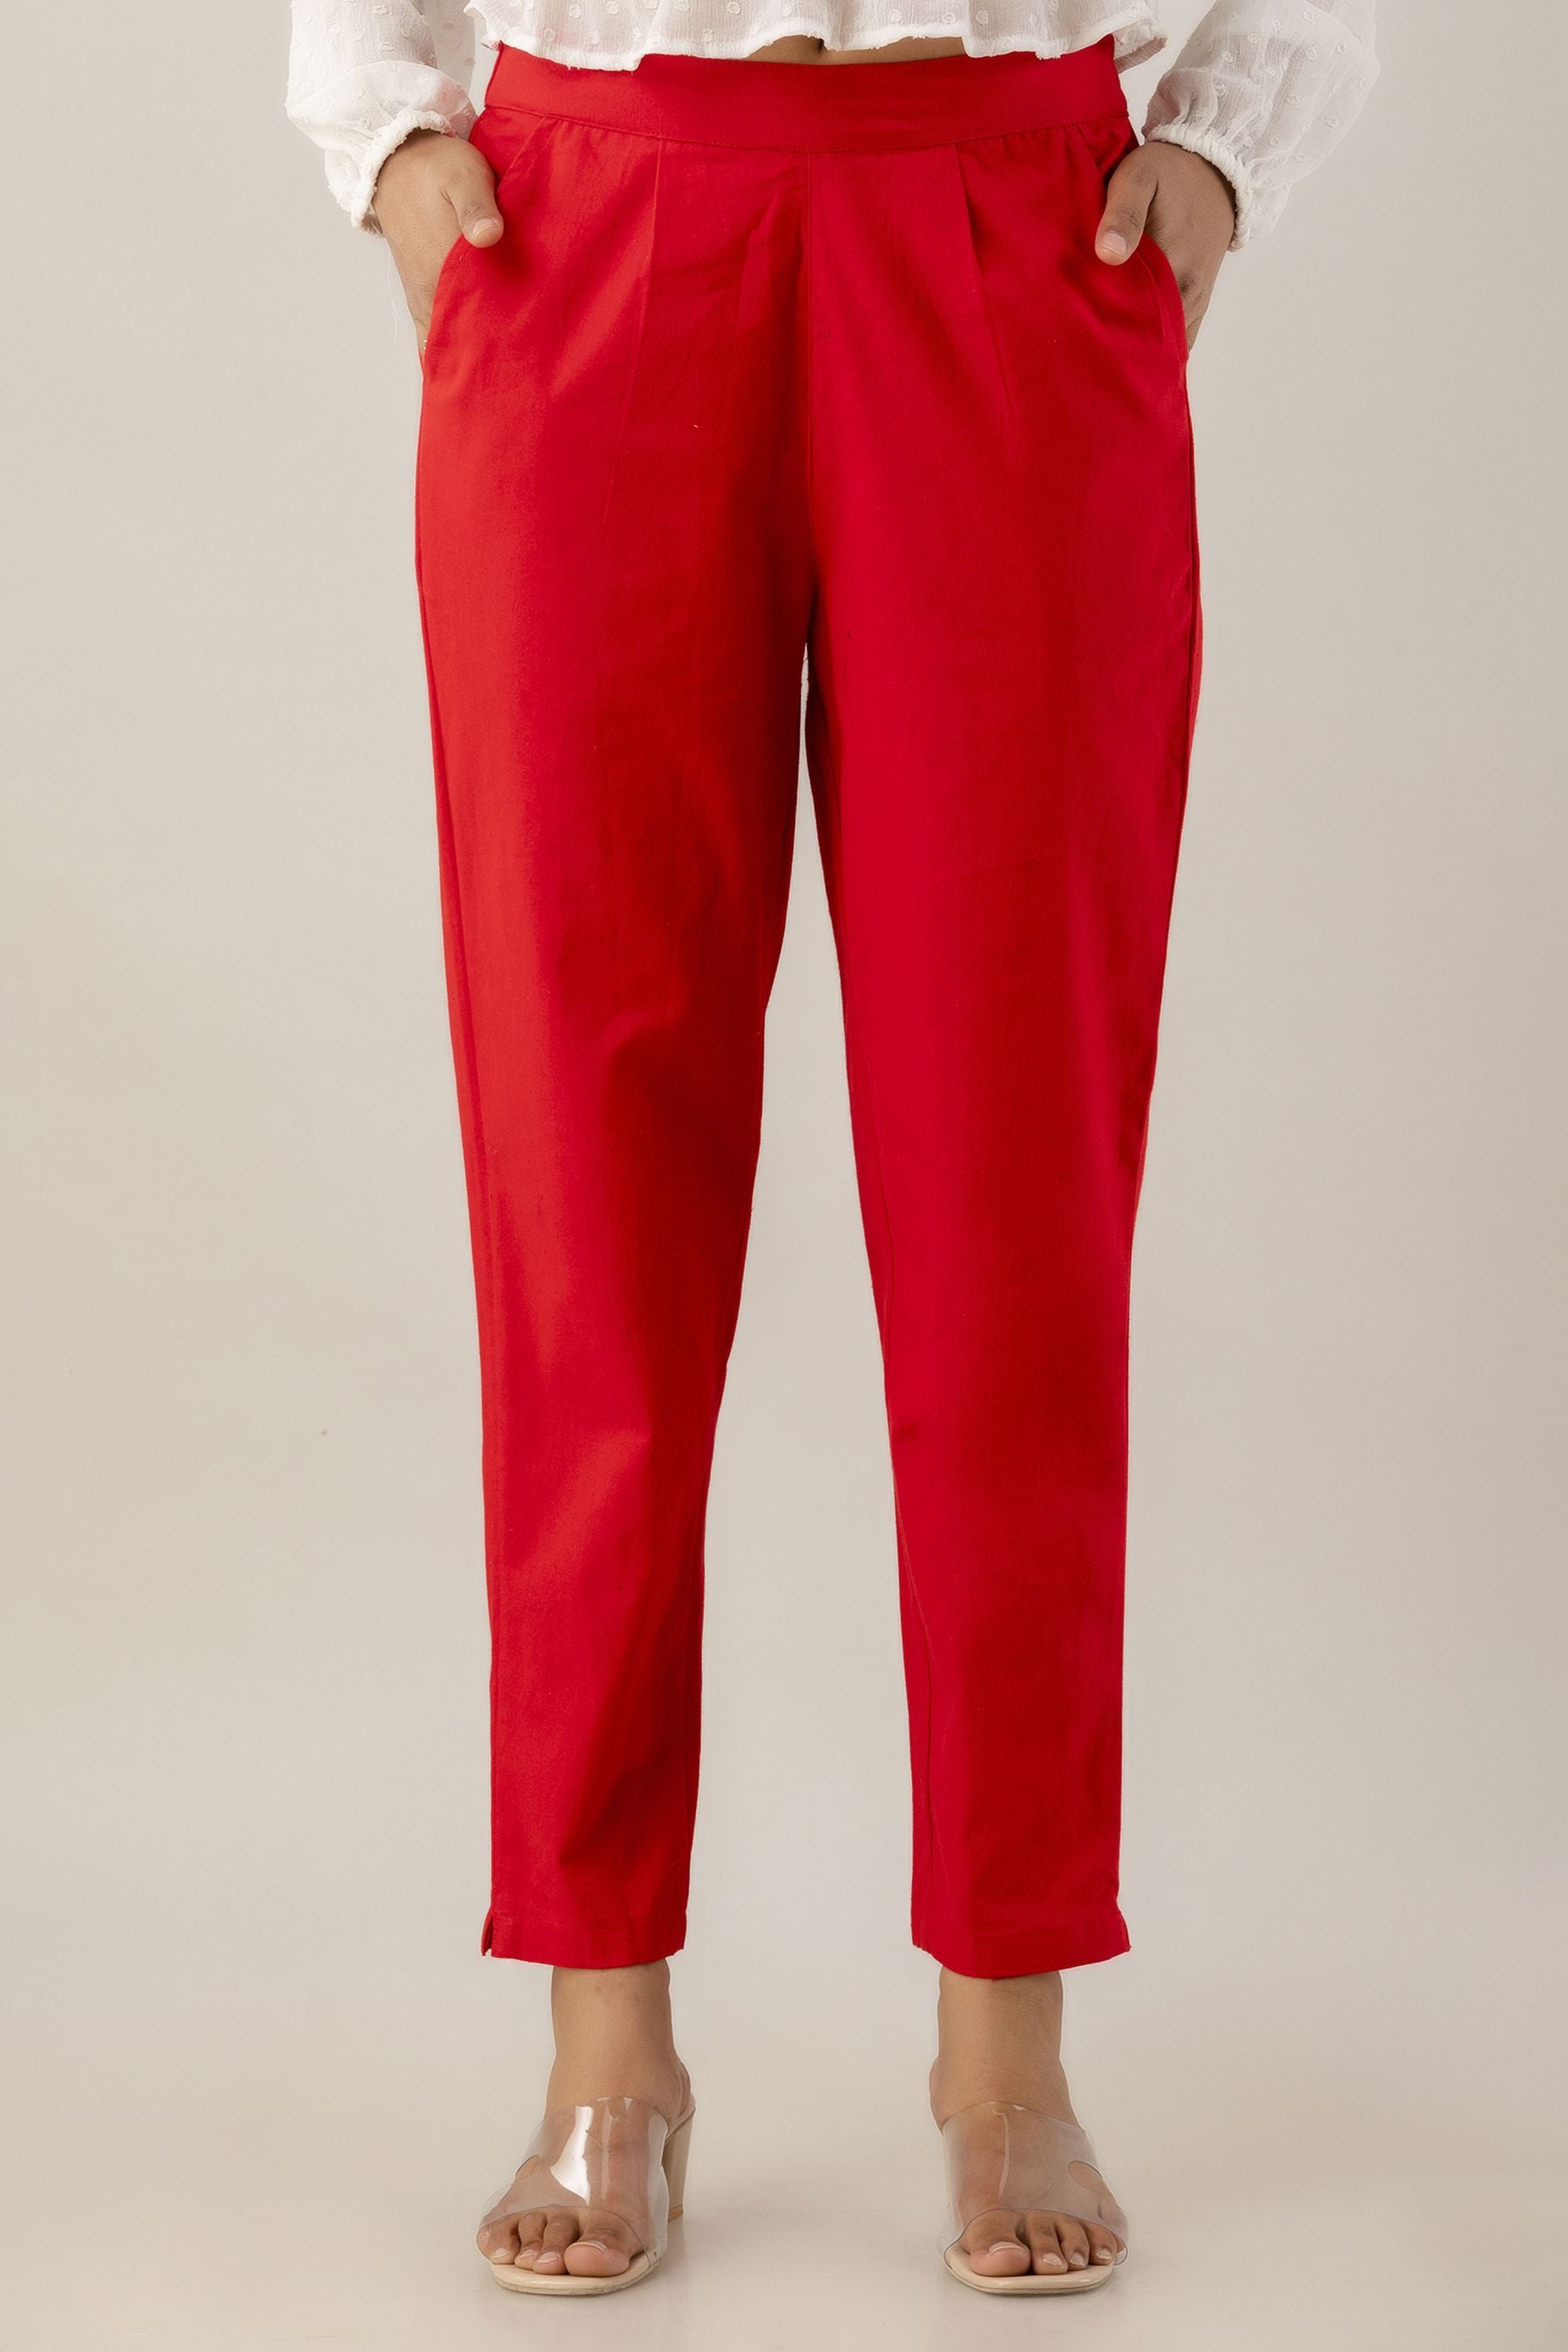 Juniper Bottoms  Buy Juniper Red Cotton Solid Cigarette Pants Online   Nykaa Fashion